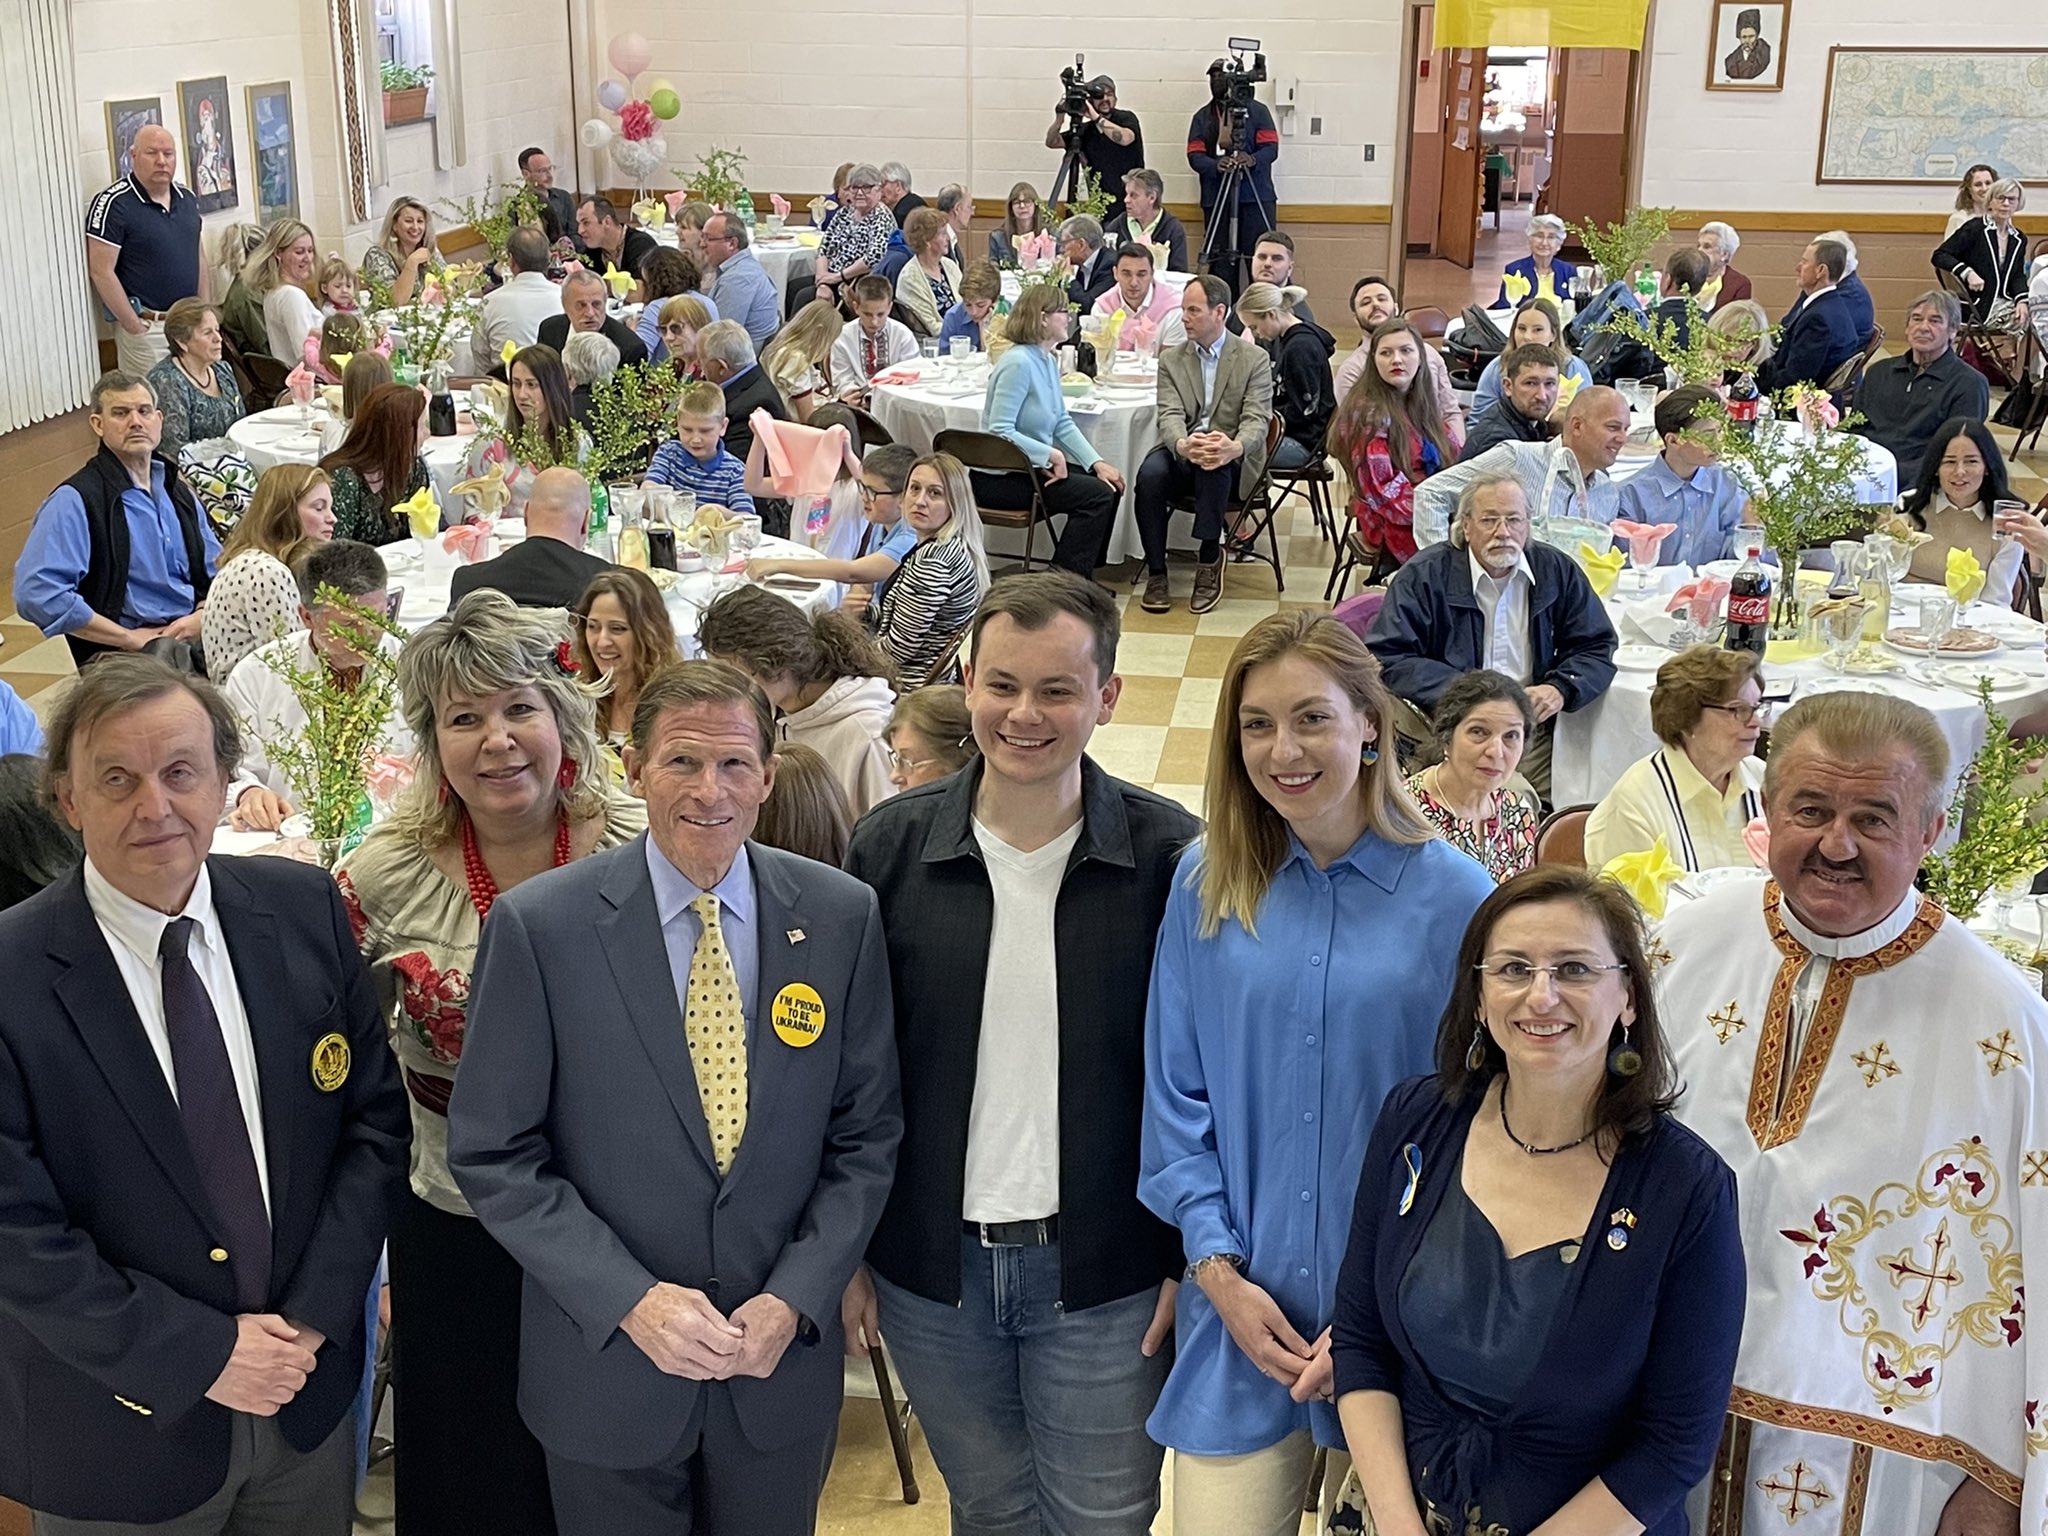 U.S. Senator Richard Blumenthal (D-CT) met with four Ukrainian refugee families at the St. Michael’s Ukrainian Catholic Church Easter Luncheon in New Haven to provide updates on Congress’s efforts to provide funding and support to Ukraine.